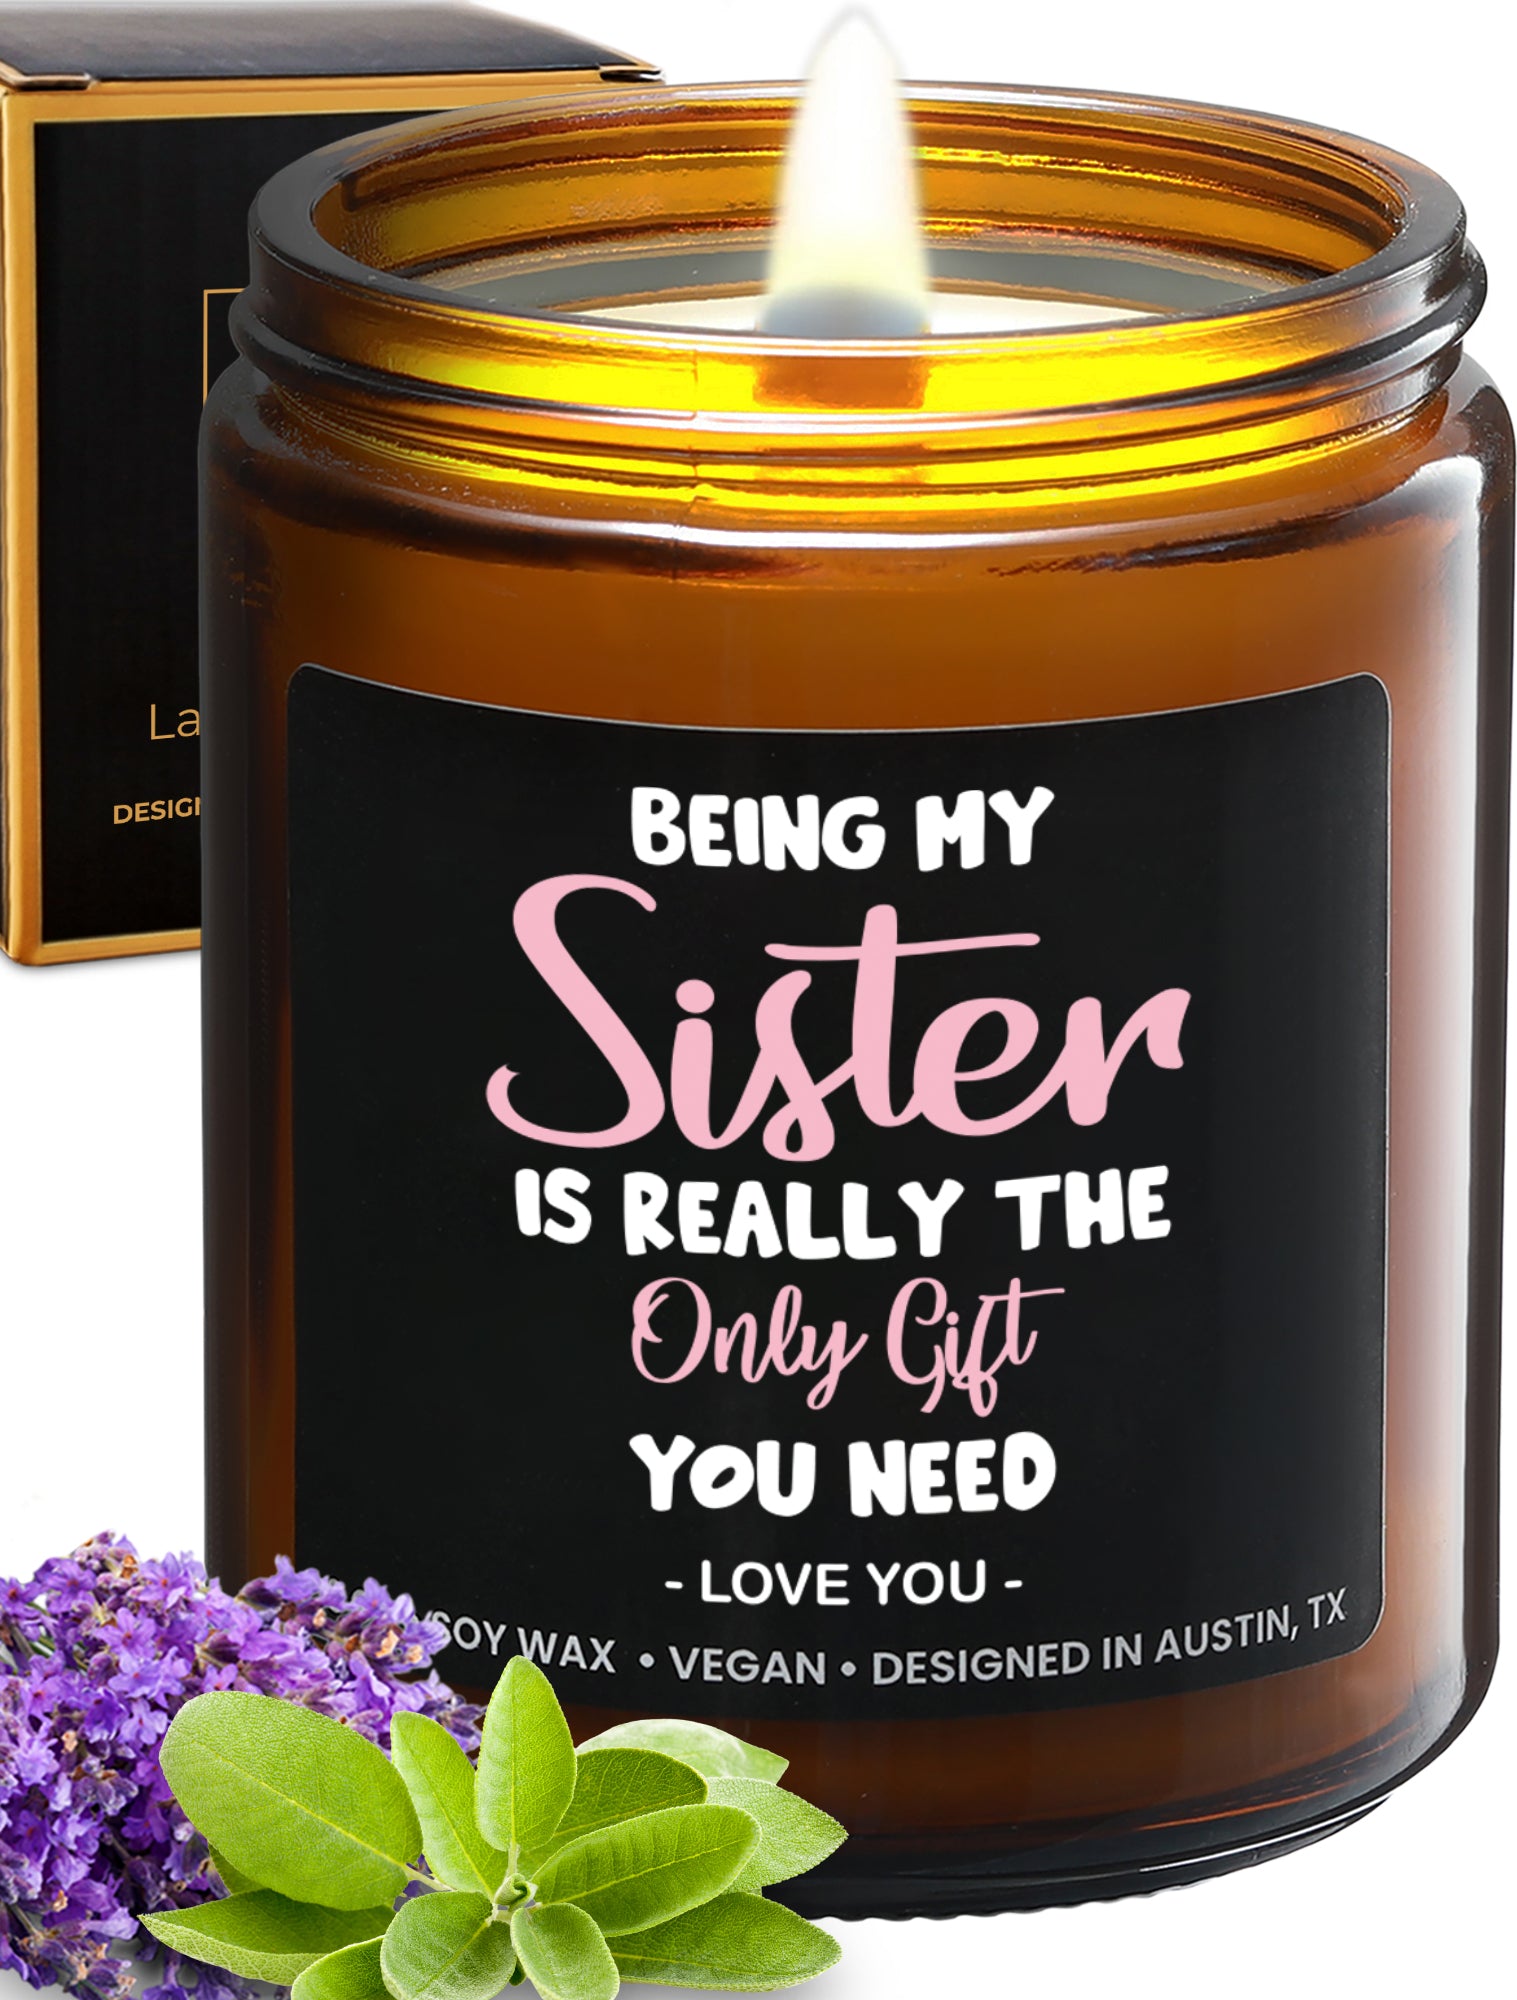 Sister Gift Sister Gifts For Sister Candle With Message Sister